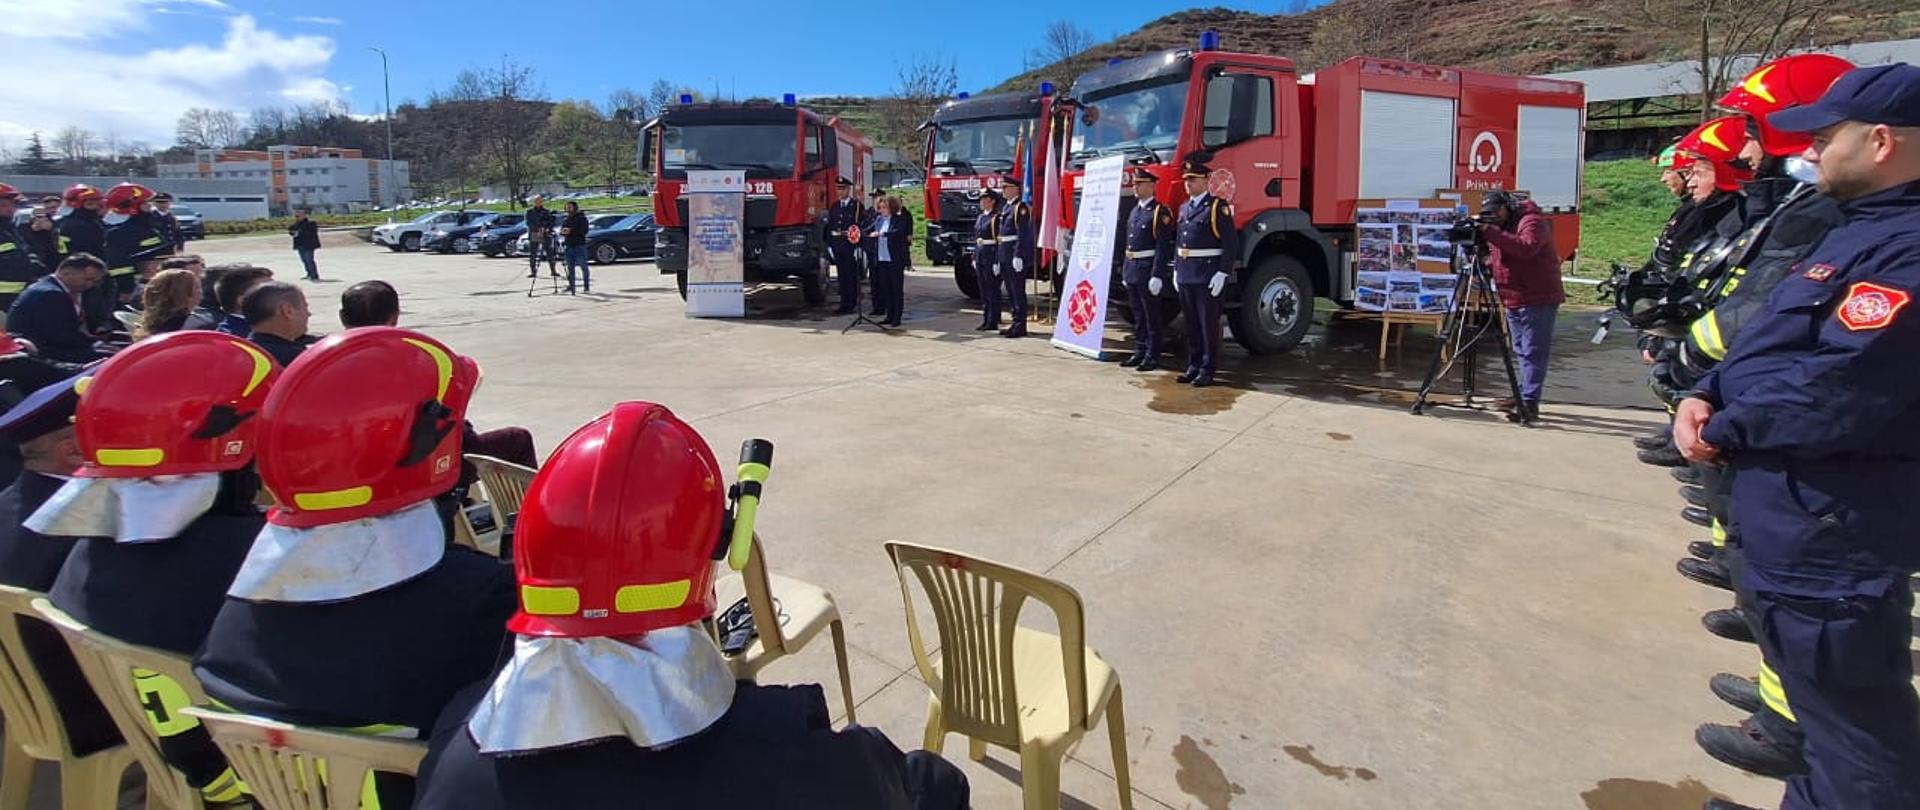 Ceremony of official handover of fire trucks for Albanian municipalities of Lezhë, Fier and Pogradec